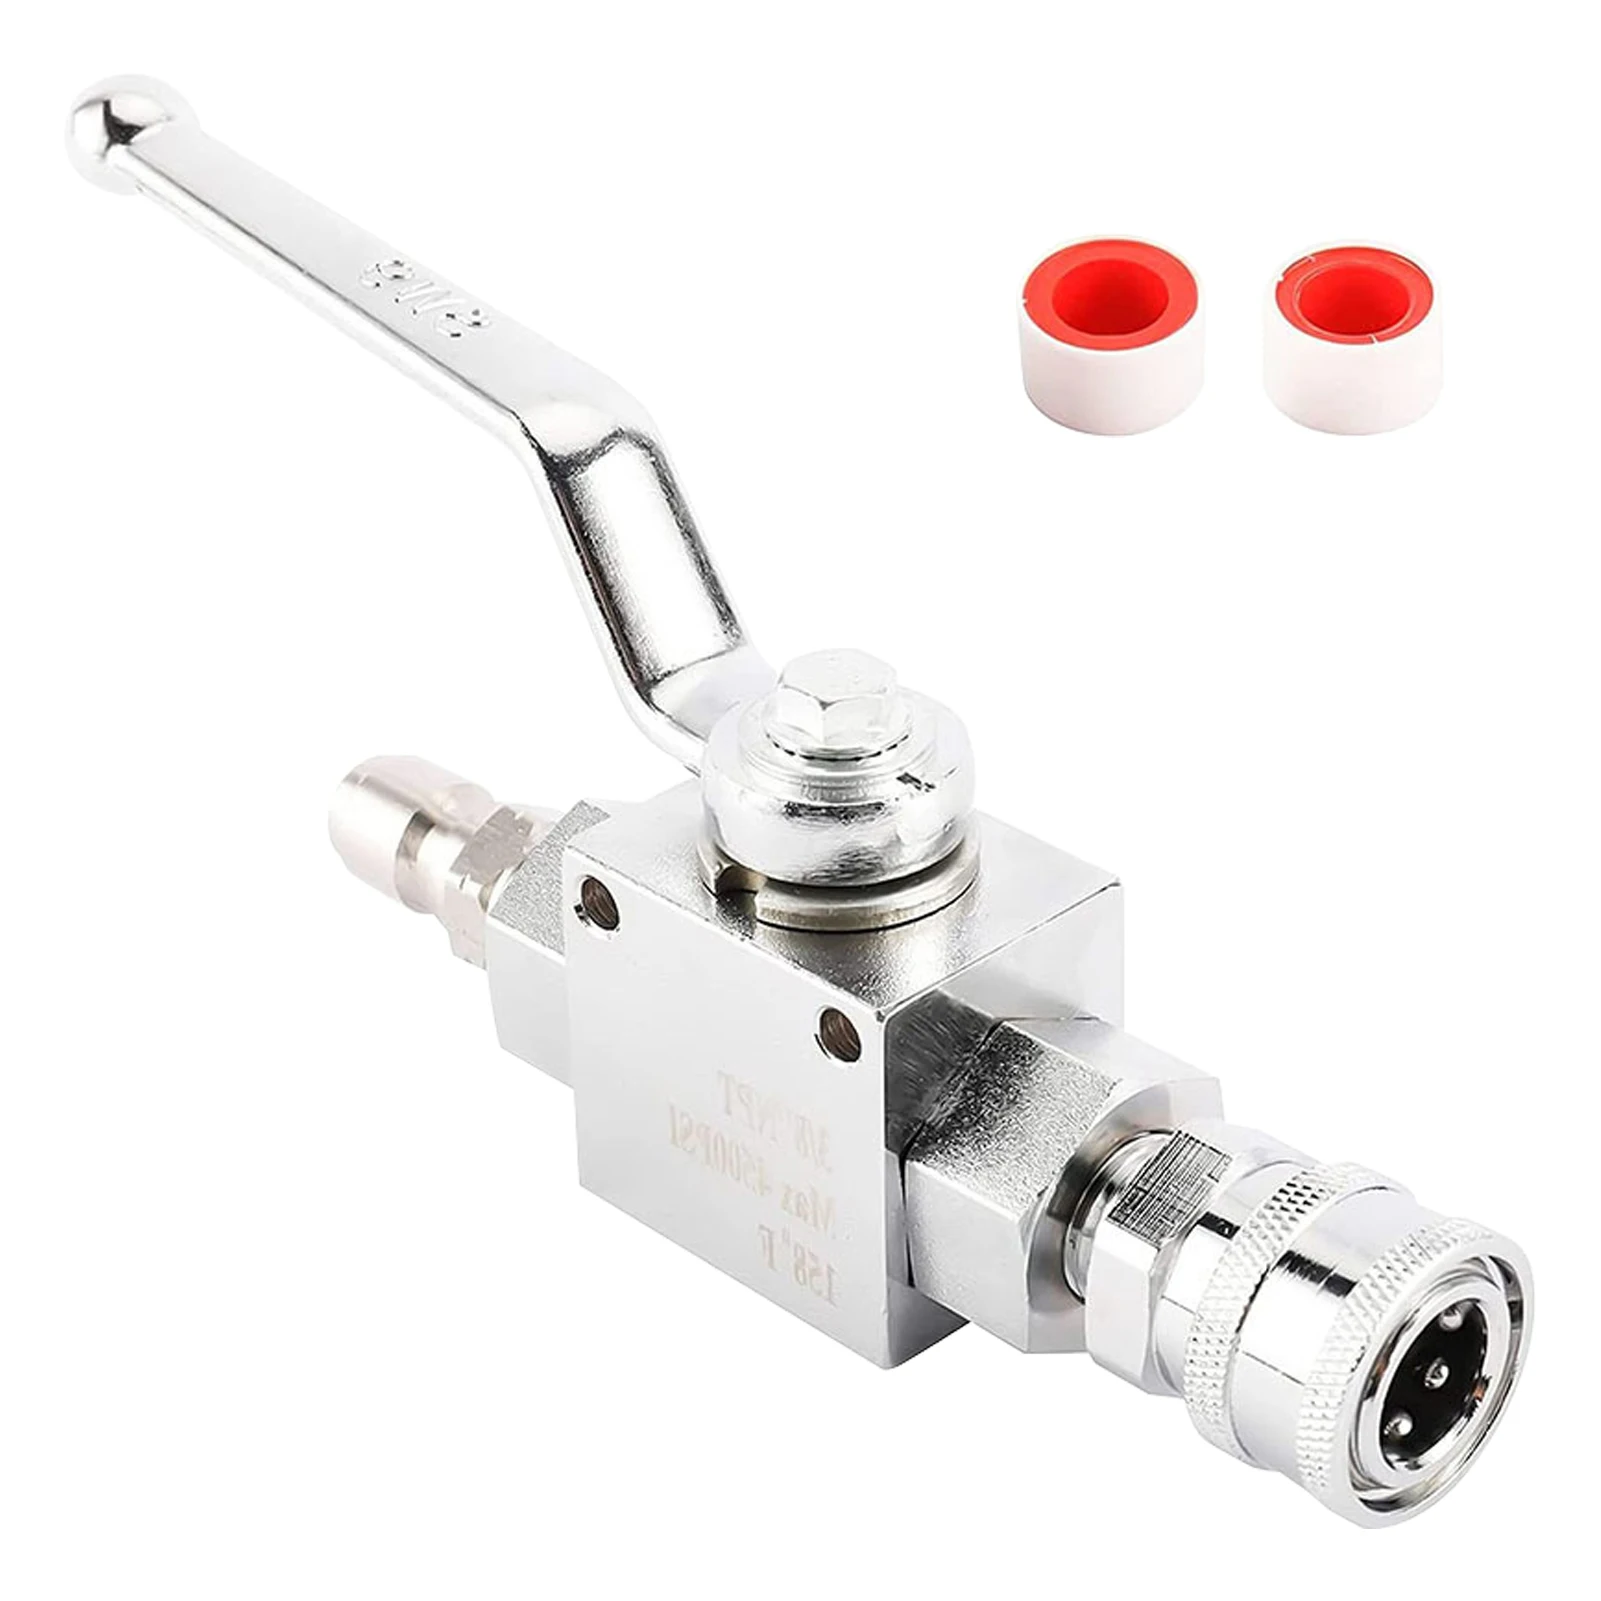 

Durable Ball Valve Kit Convenient Wear Resistant Power Sturdy Easy To Use Stainless Steel Pressure Washer Leakproof Time Saving